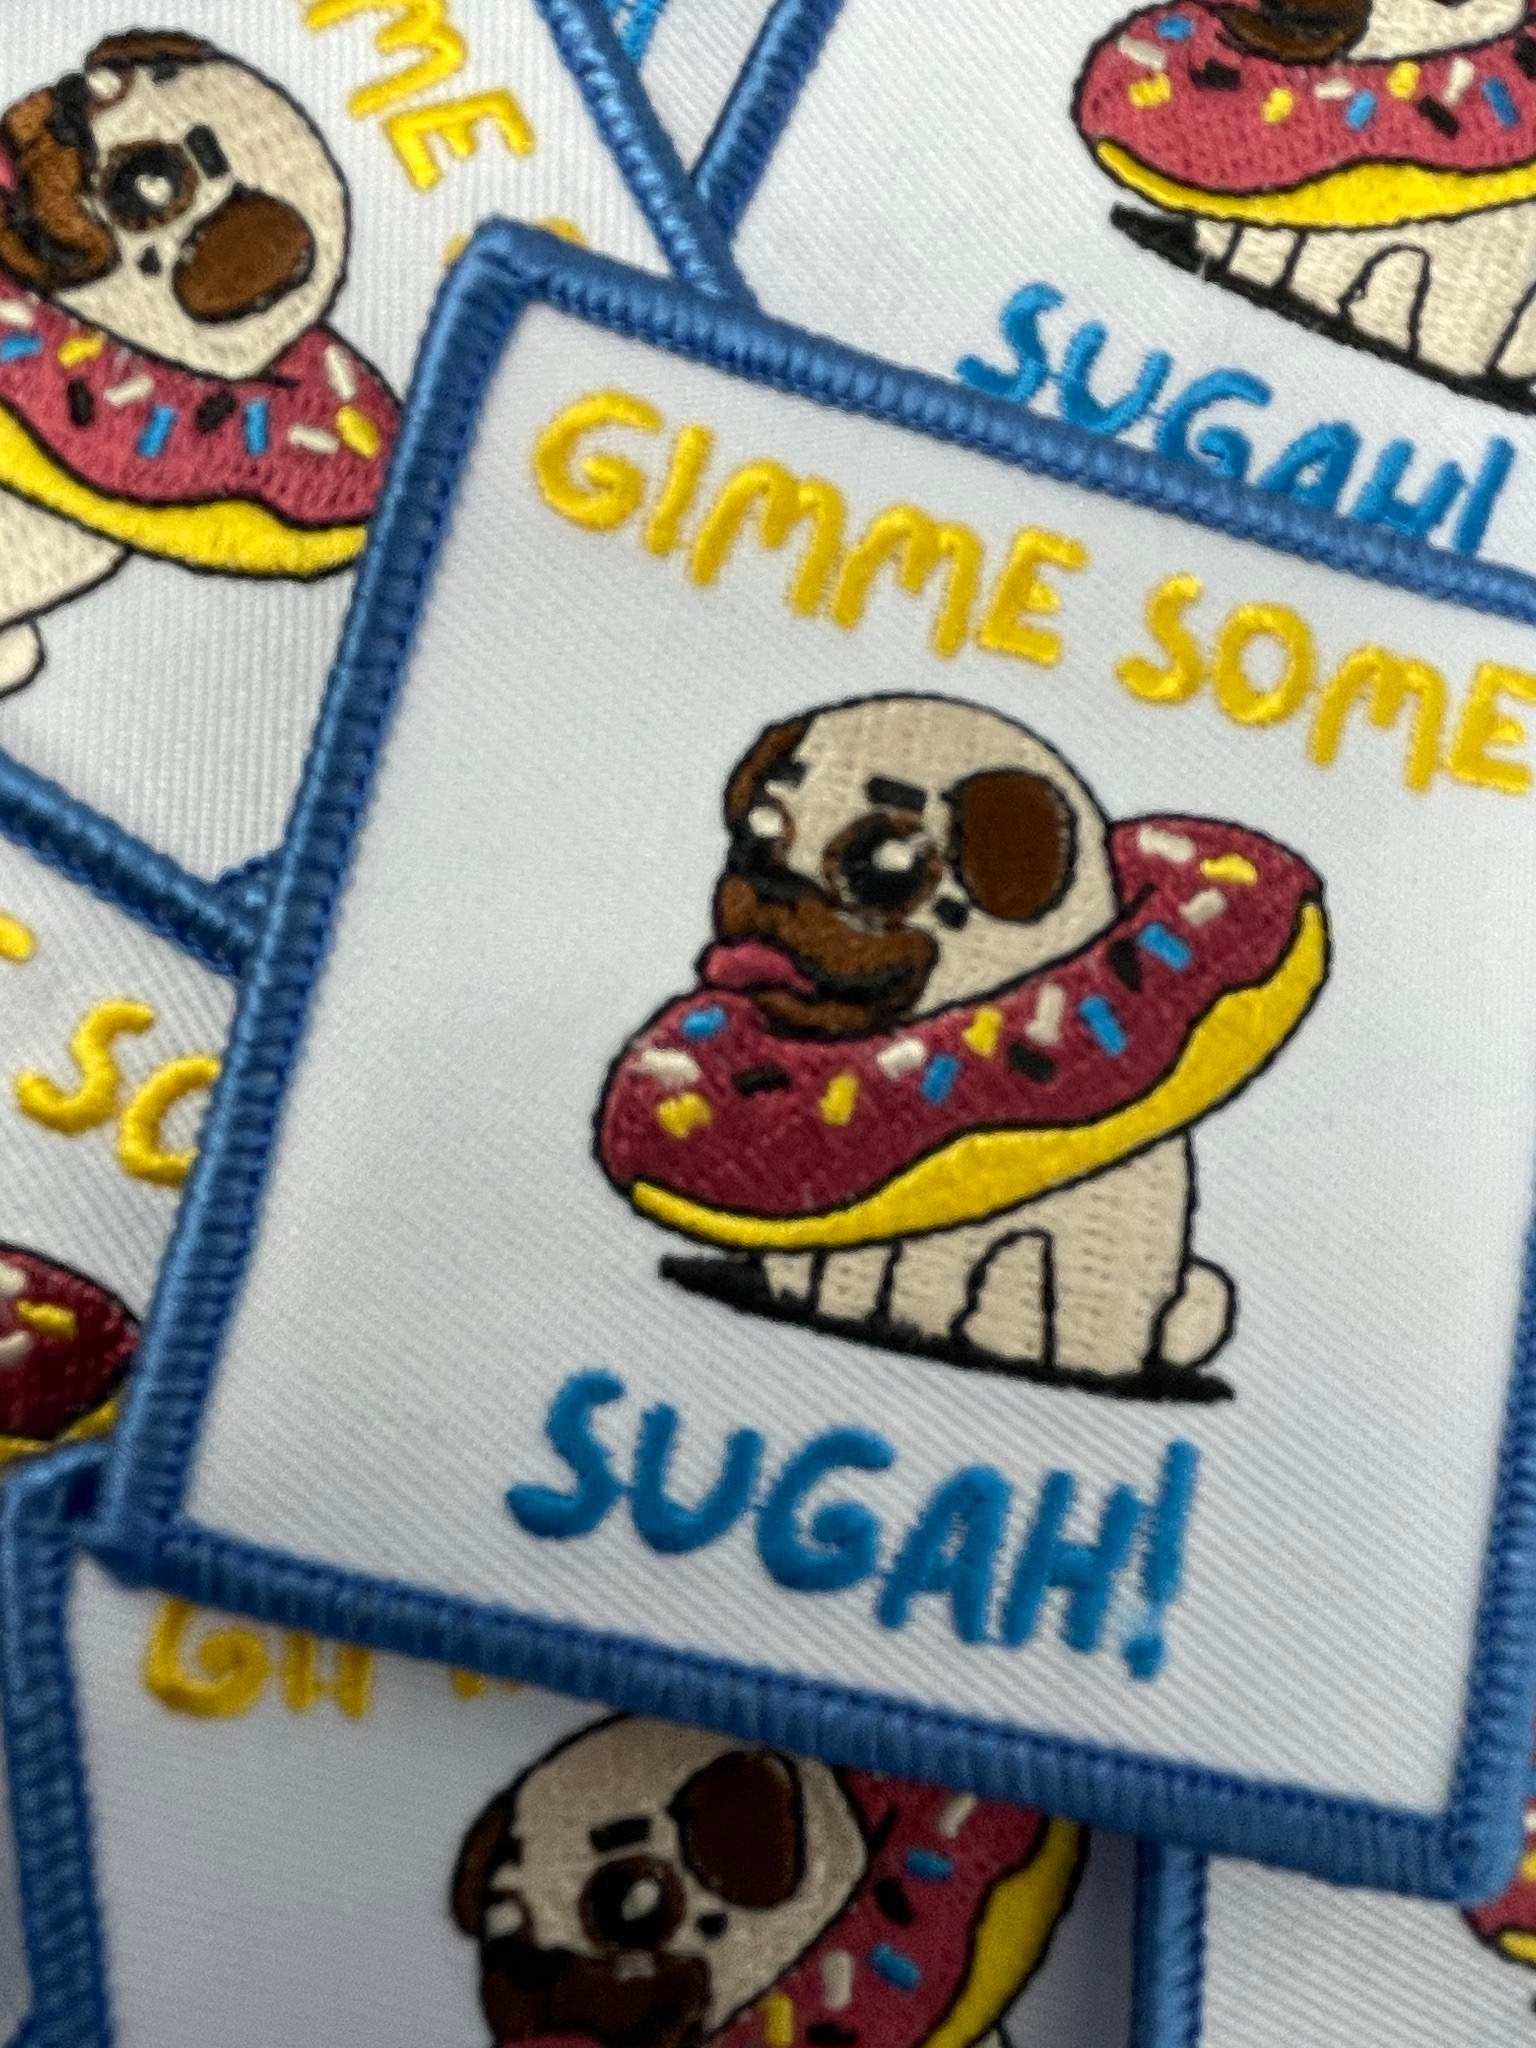 Patched Up Pup: "Gimme Some Sugah" Iron-on Embroidered Patch for Dogs, Patch for Dog Lovers, Gift for Your Dog, Sz. 2.5", Doggie Vest